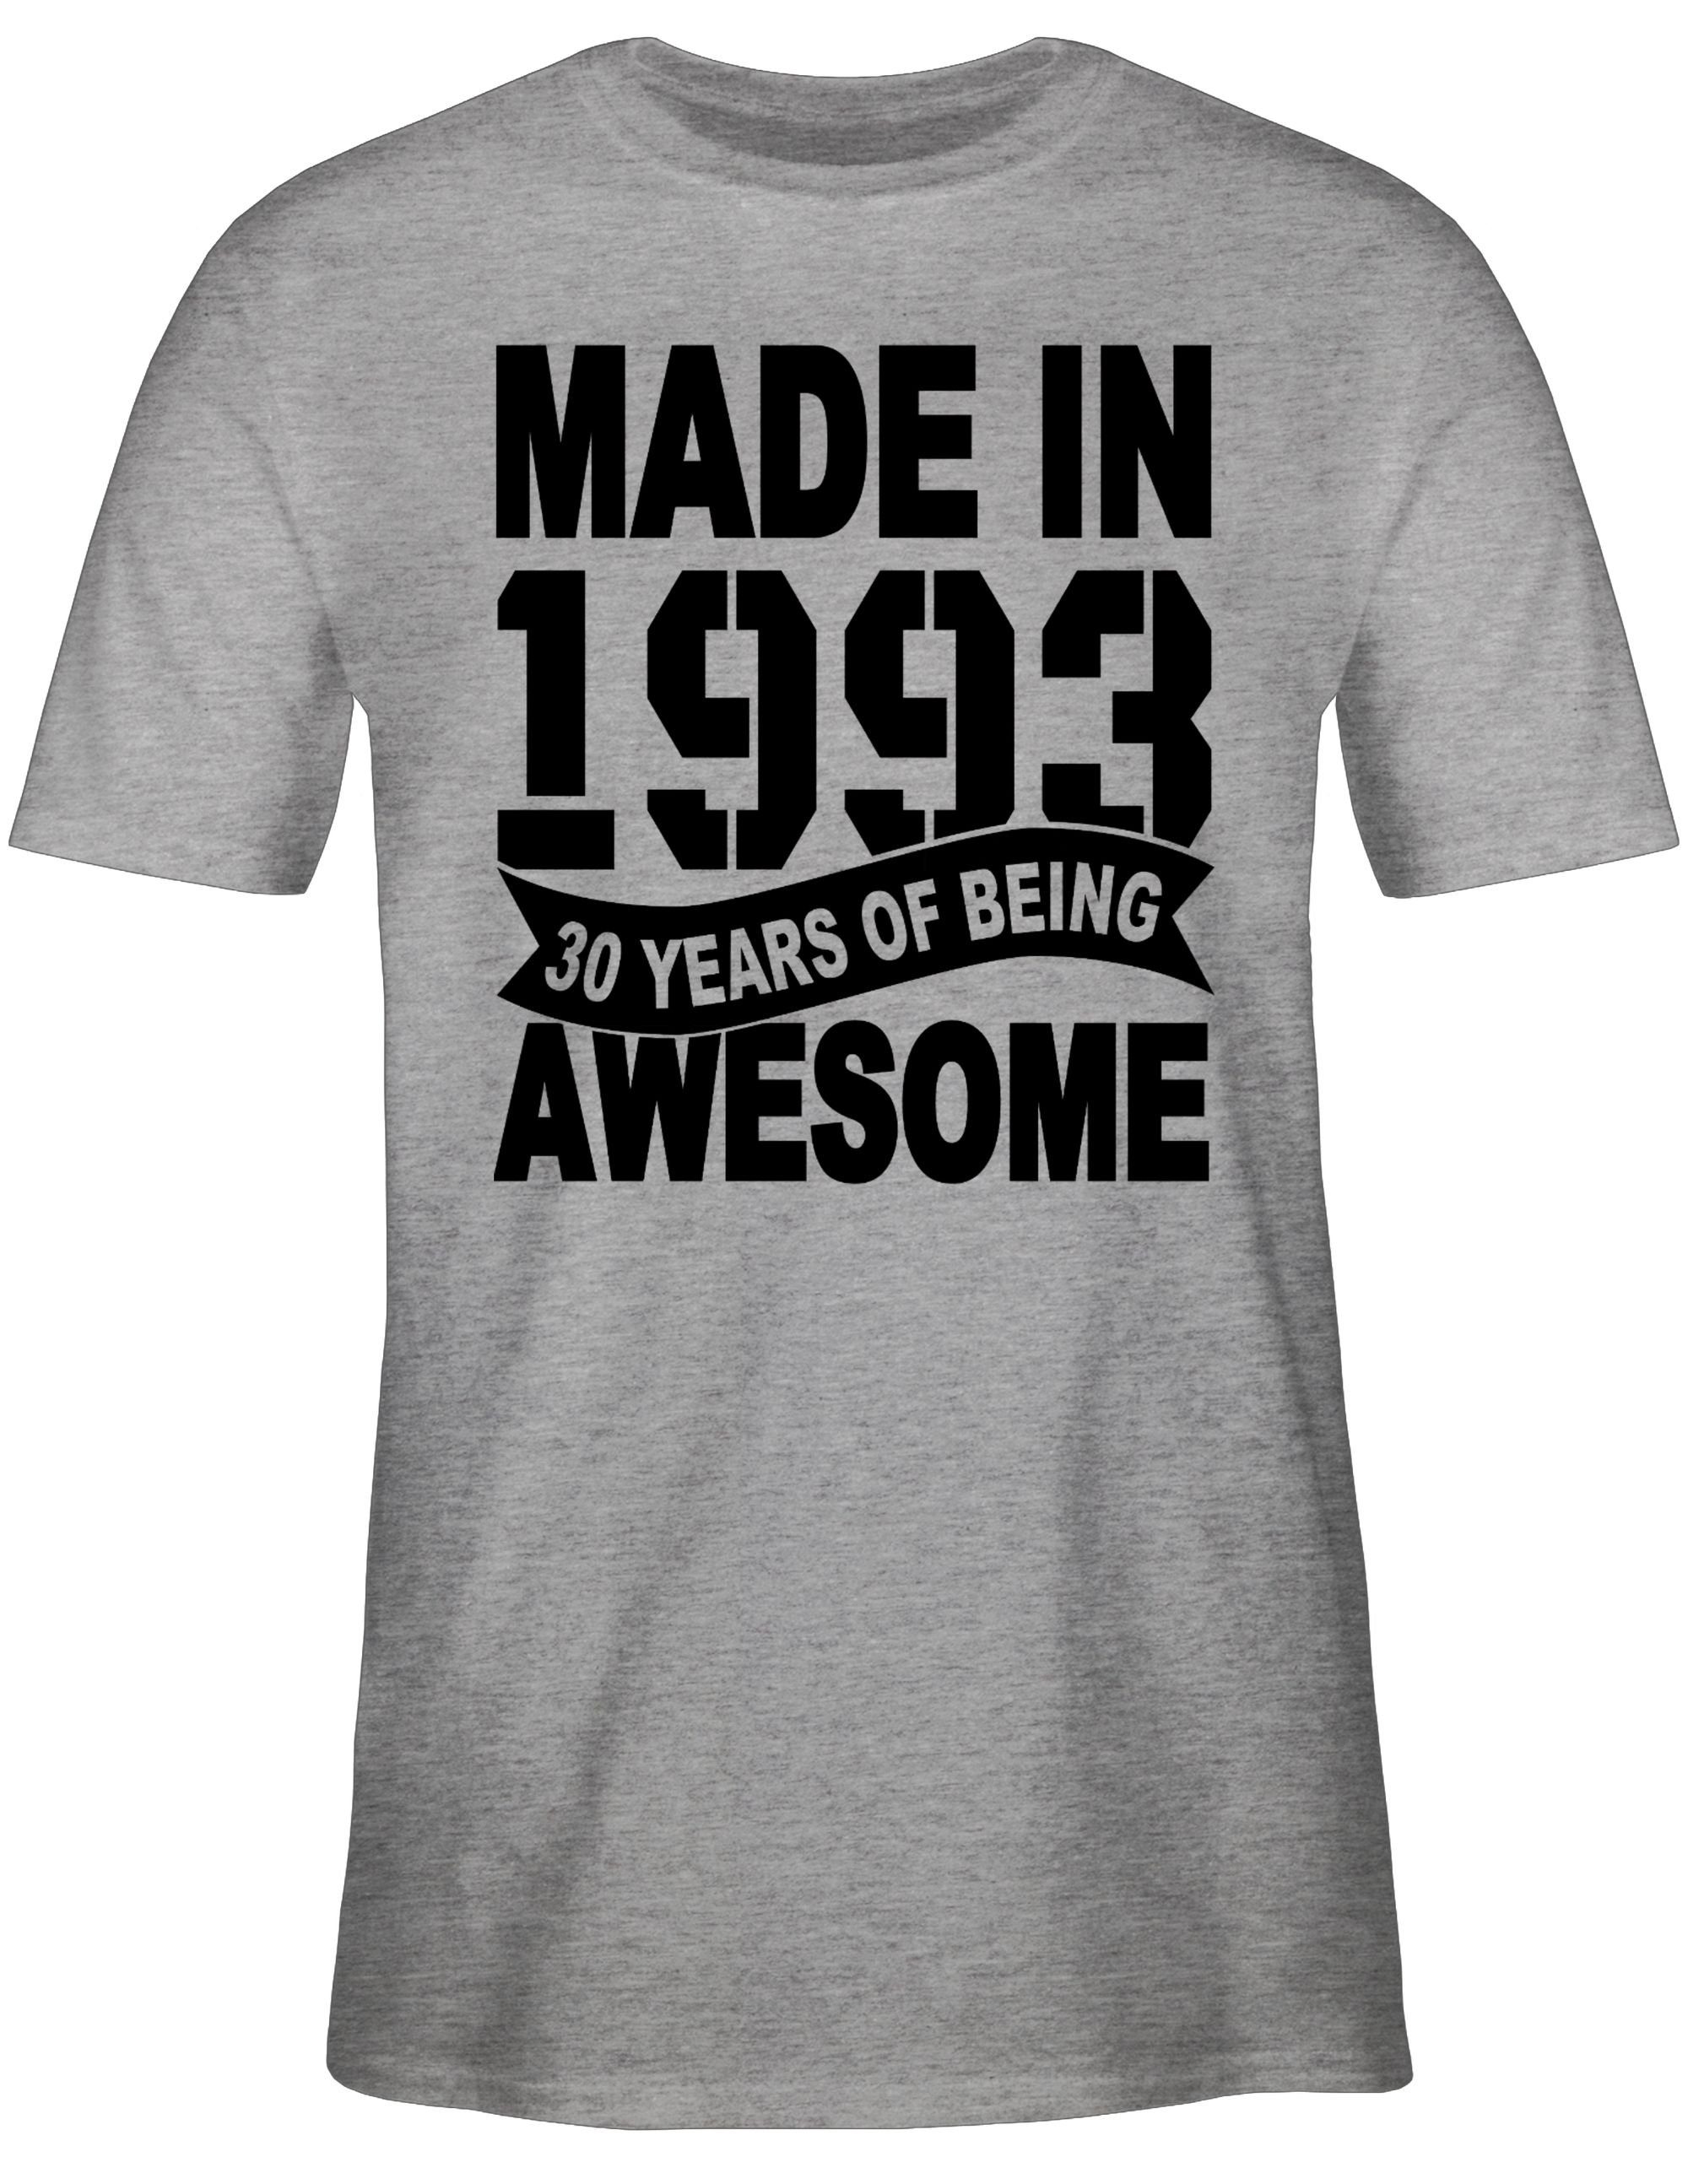 Grau meliert 30. 3 Geburtstag T-Shirt of Made schwarz years Thirty 1993 awesome being in Shirtracer